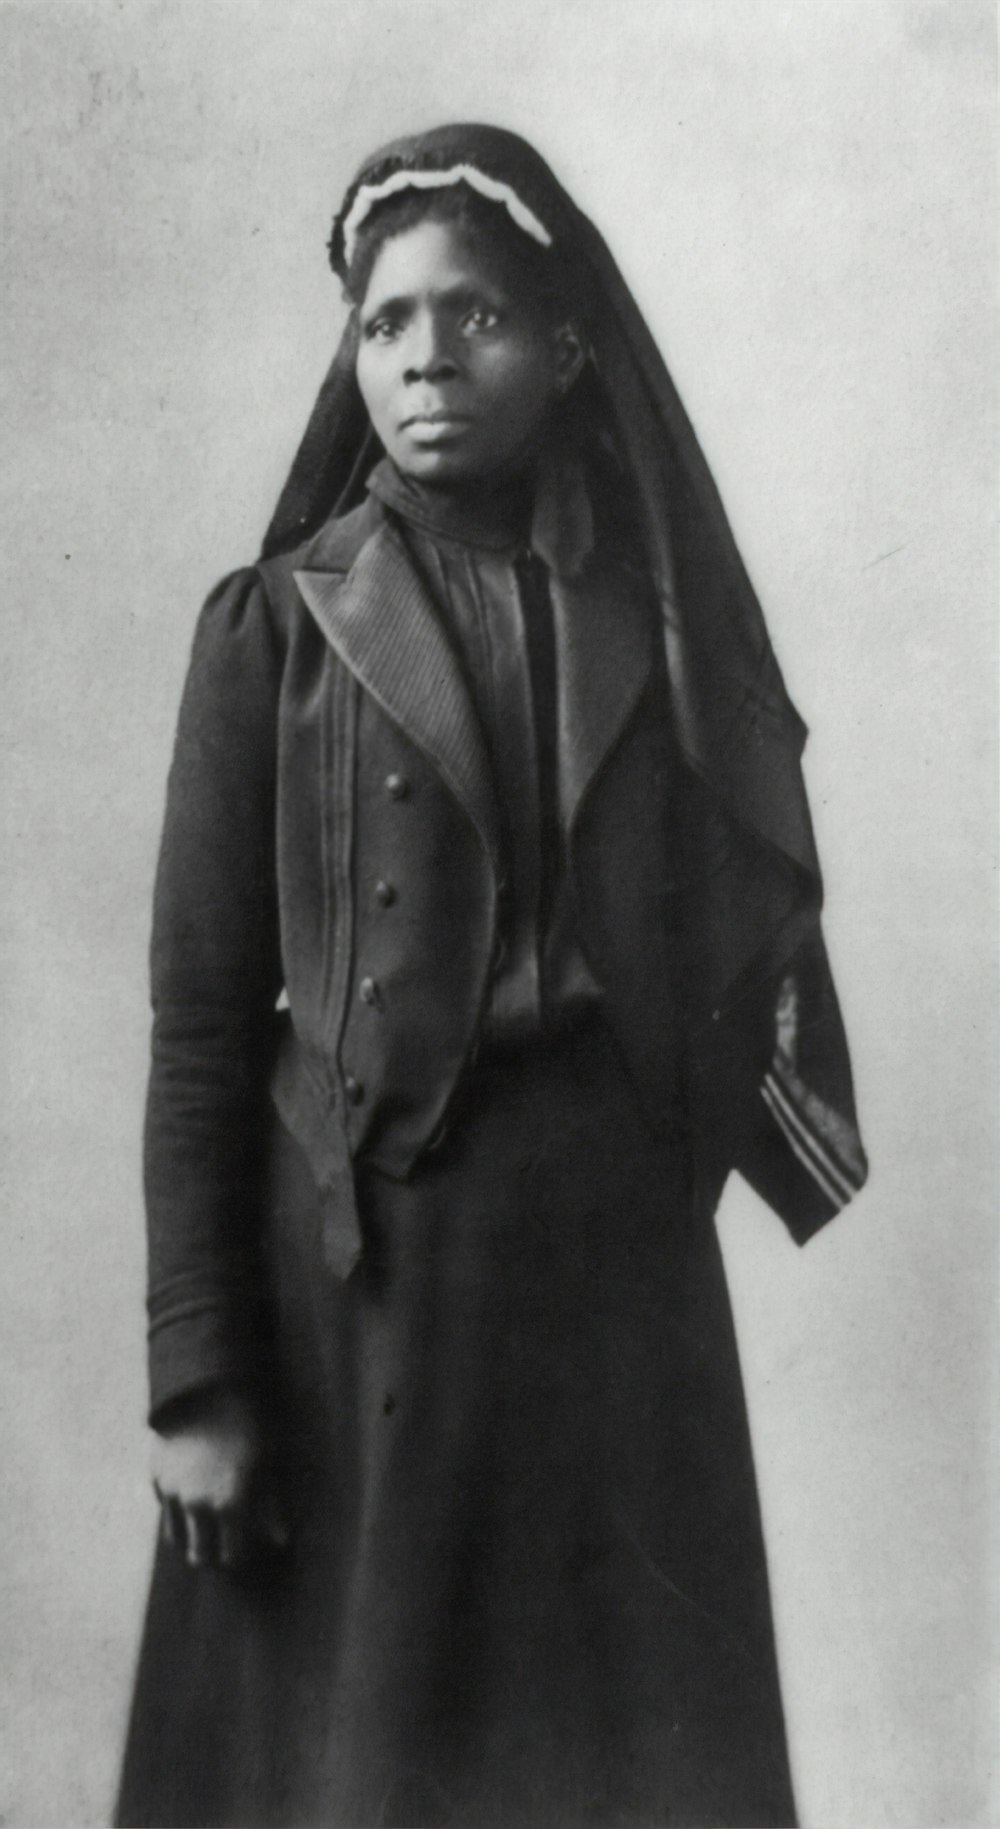 Susie King Taylor, known as the first African American Army nurse